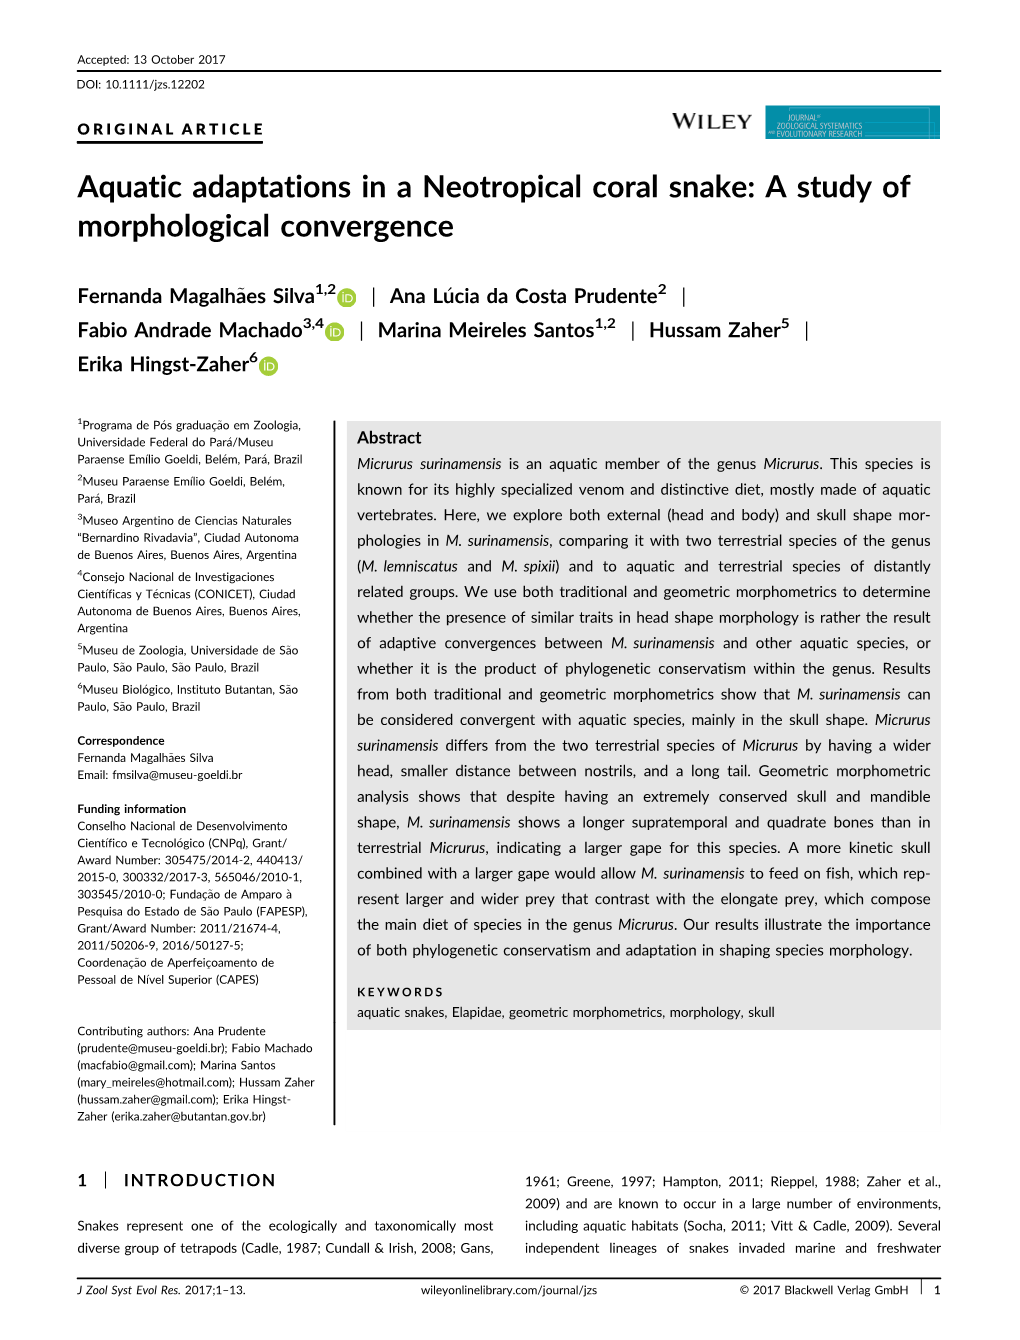 Aquatic Adaptations in a Neotropical Coral Snake: a Study of Morphological Convergence